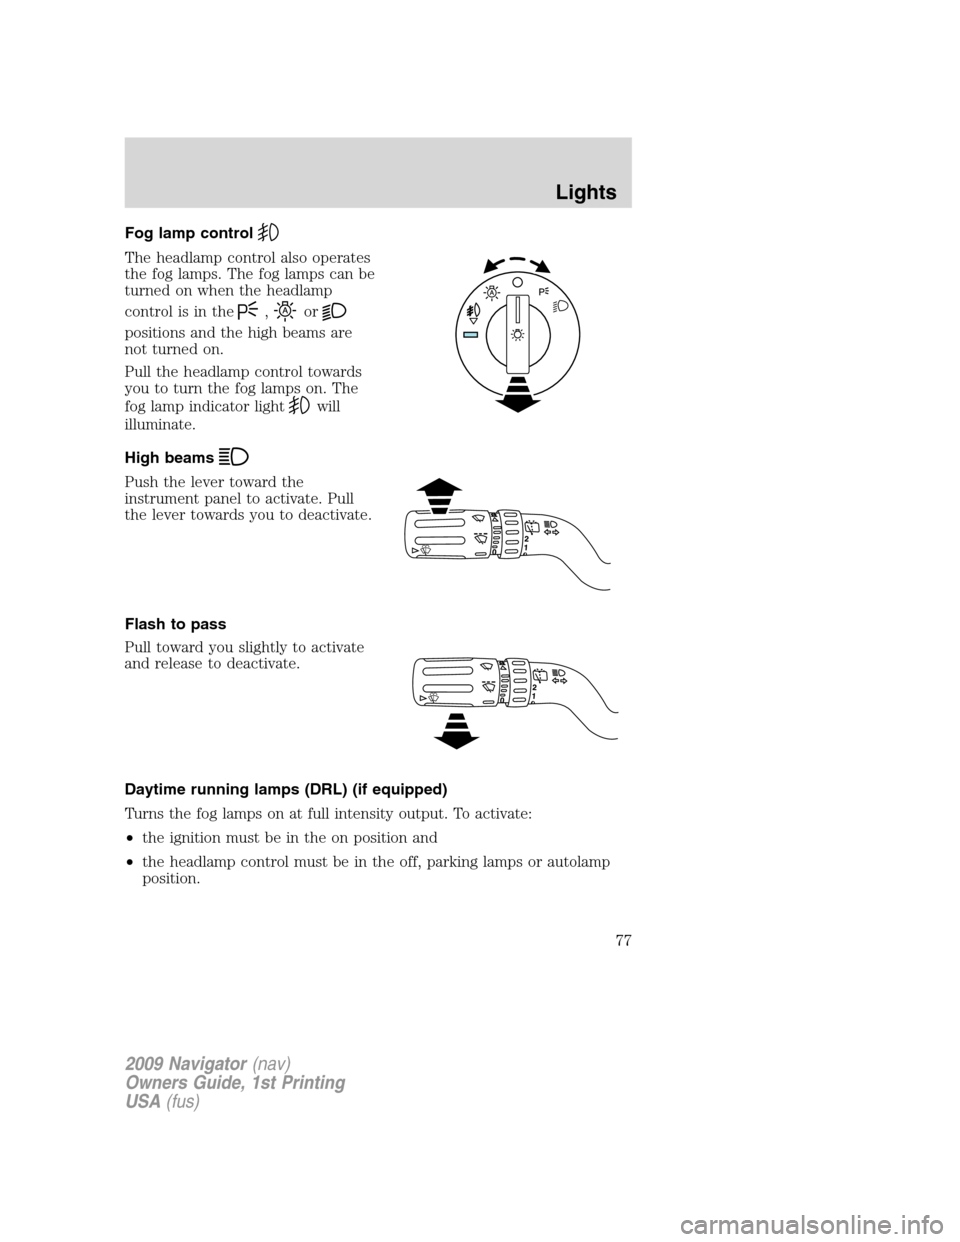 LINCOLN NAVIGATOR 2009 Manual PDF Fog lamp control
The headlamp control also operates
the fog lamps. The fog lamps can be
turned on when the headlamp
control is in the
,or
positions and the high beams are
not turned on.
Pull the headl